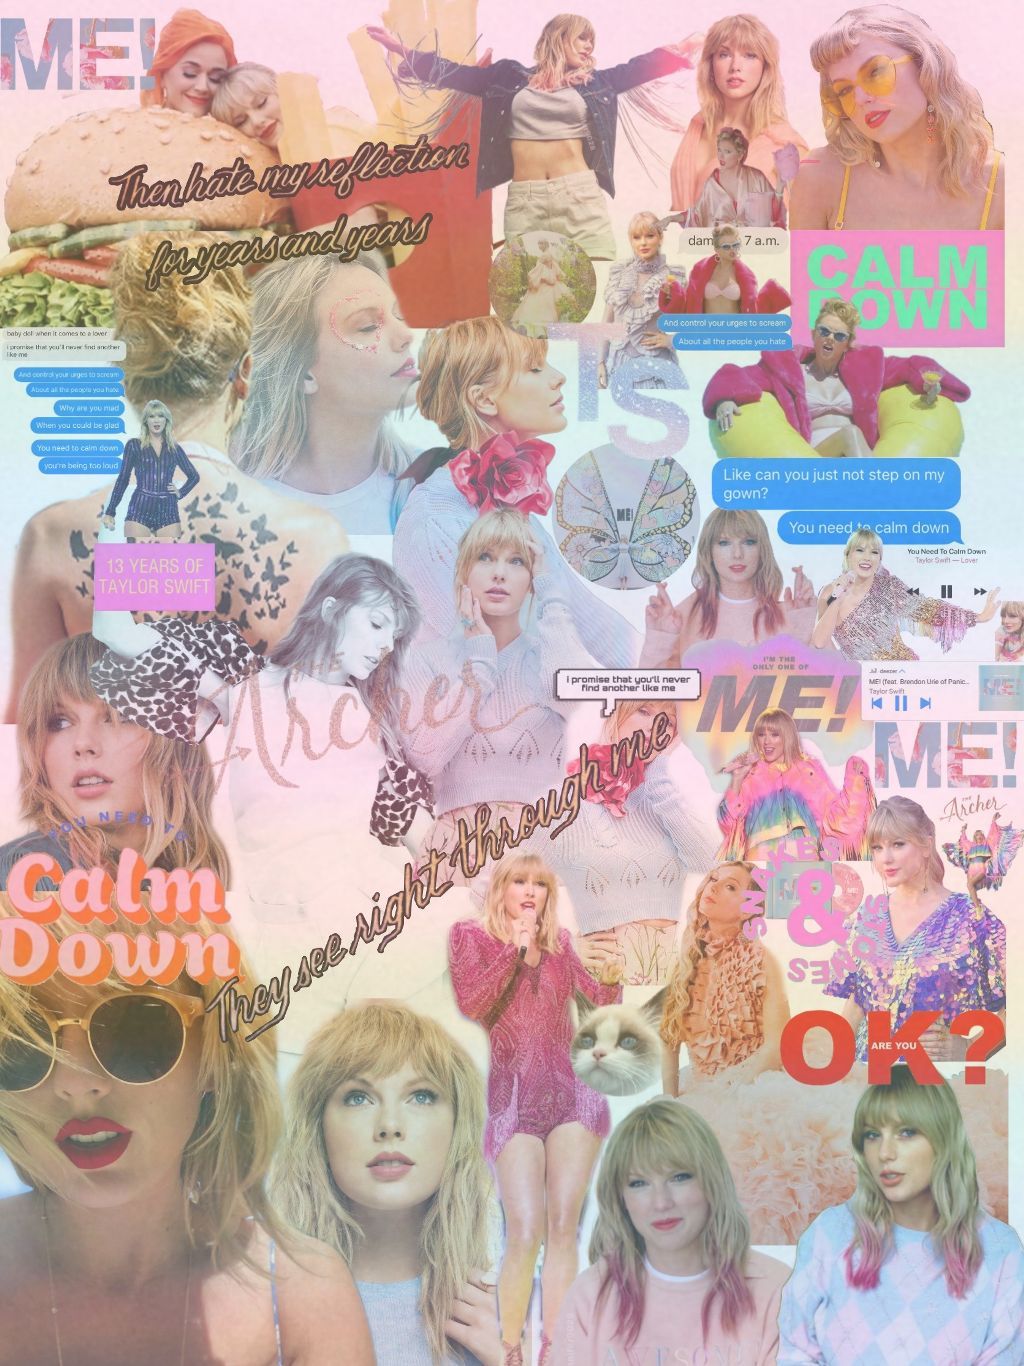 Lover Taylor Swift Aesthetic Wallpapers - Wallpaper Cave